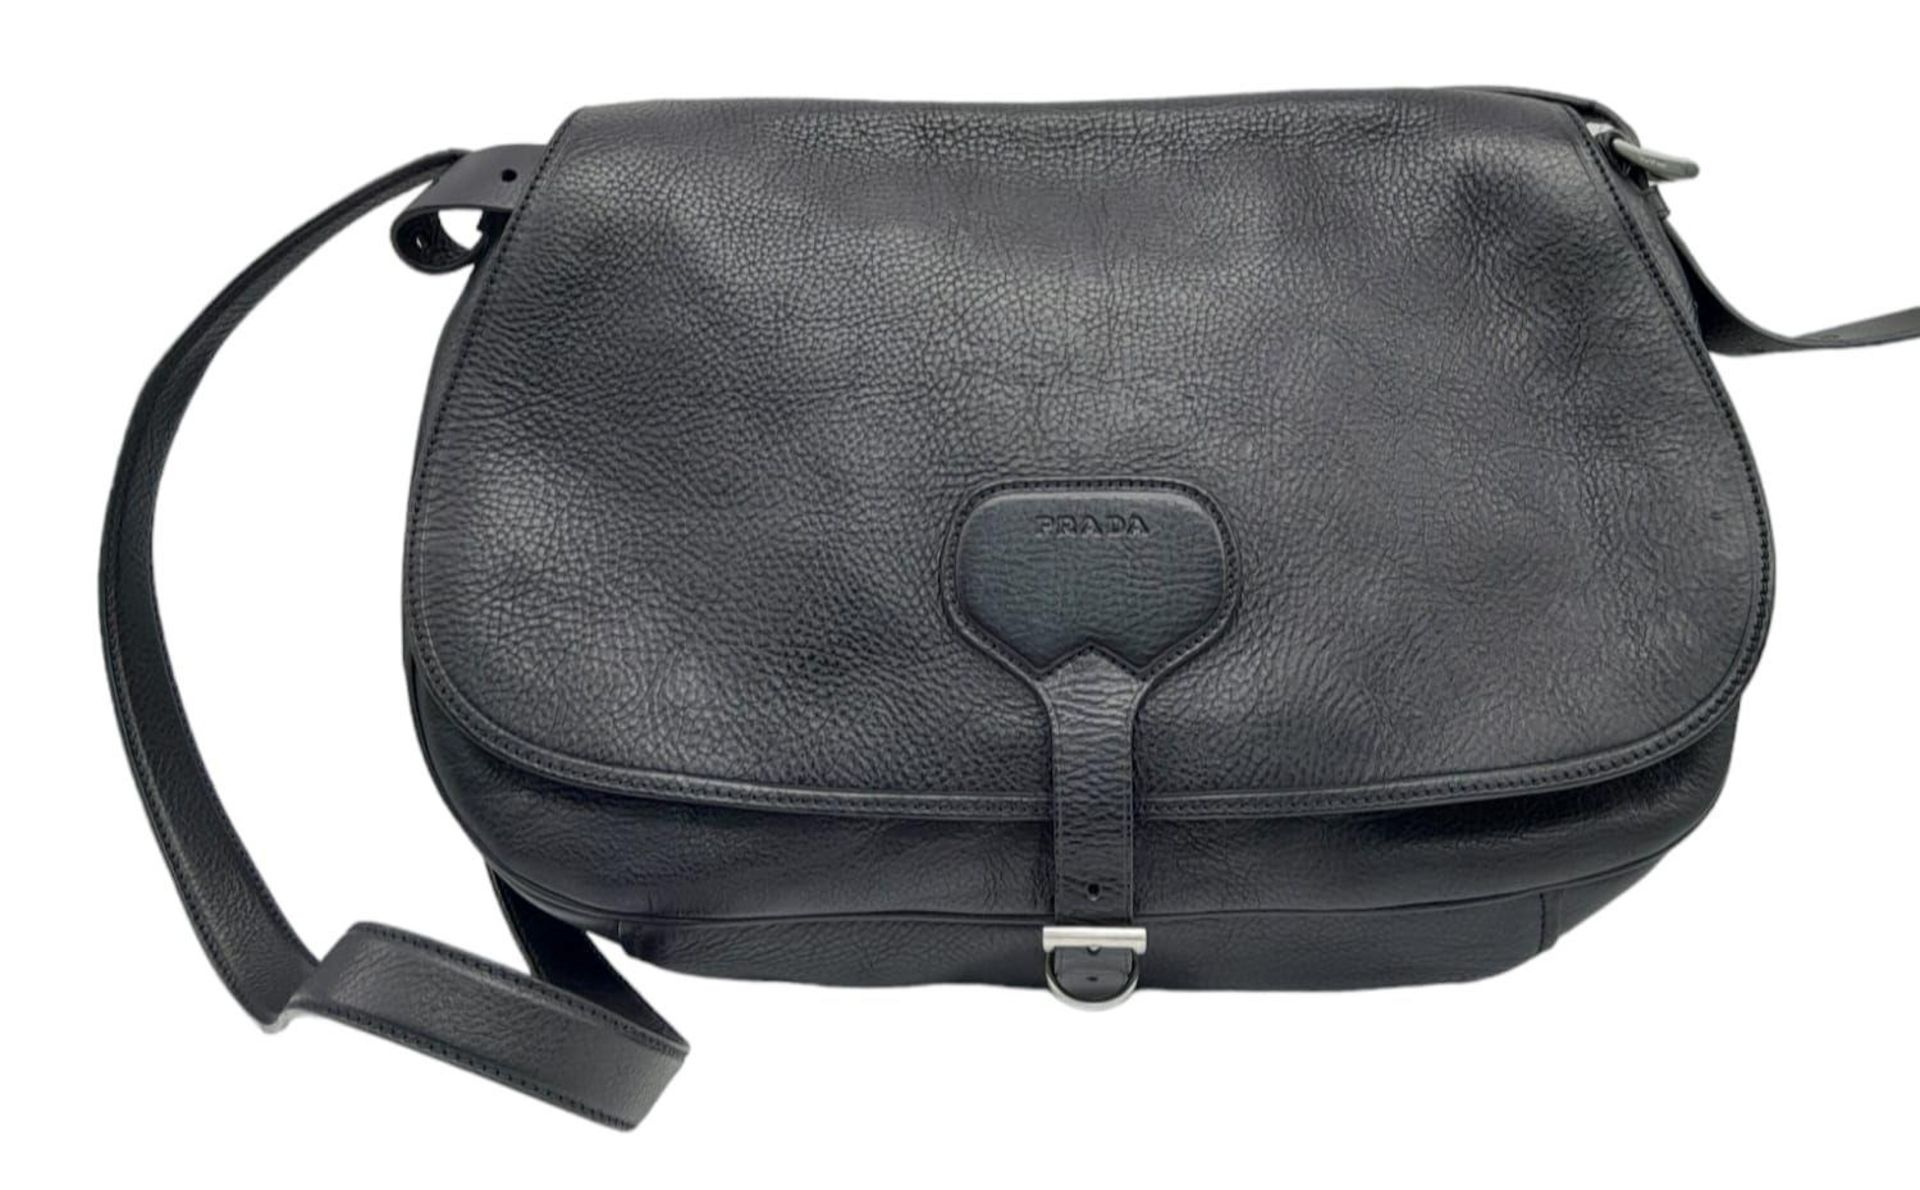 A Prada Black Leather Crossbody Satchel Bag. Textured exterior with buckled flap. Spacious leather